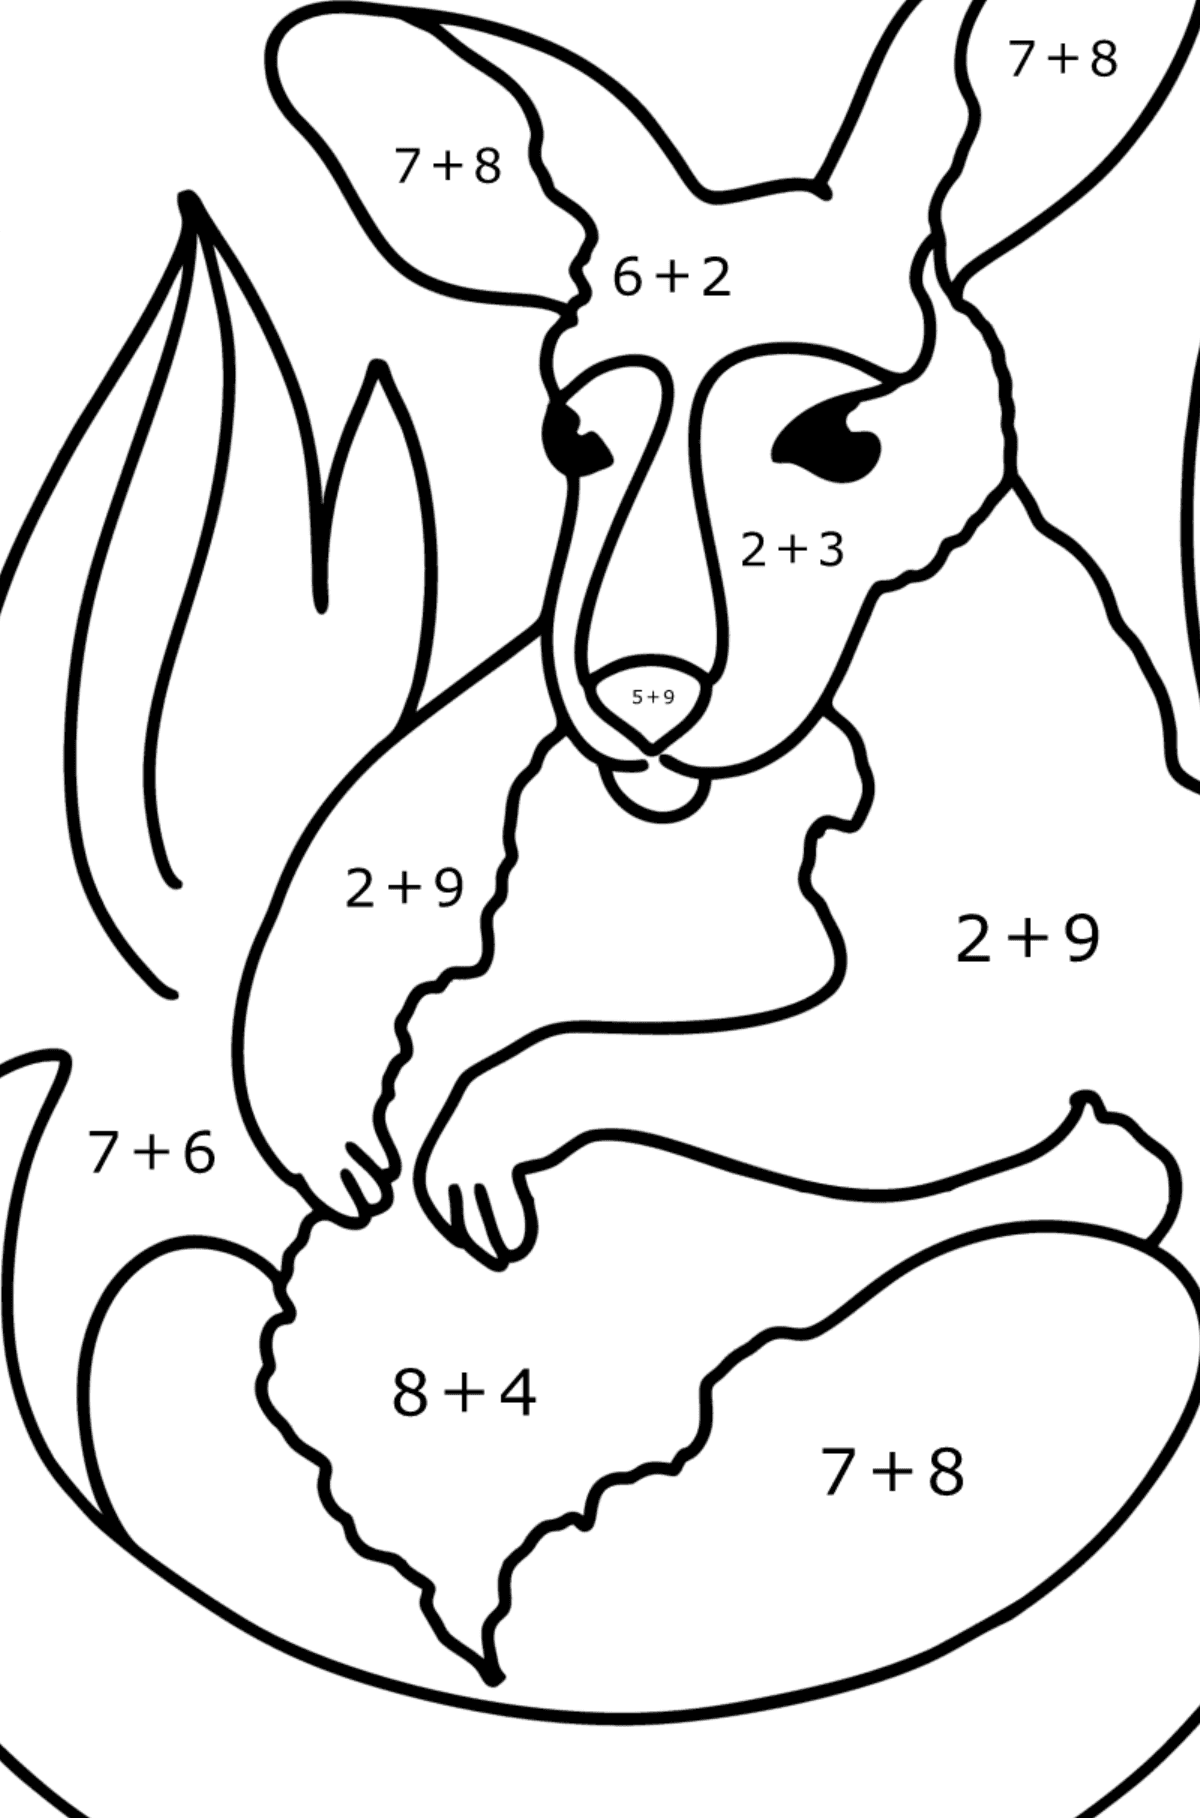 Coloring page - Adorable baby kangaroo - Math Coloring - Addition for Kids